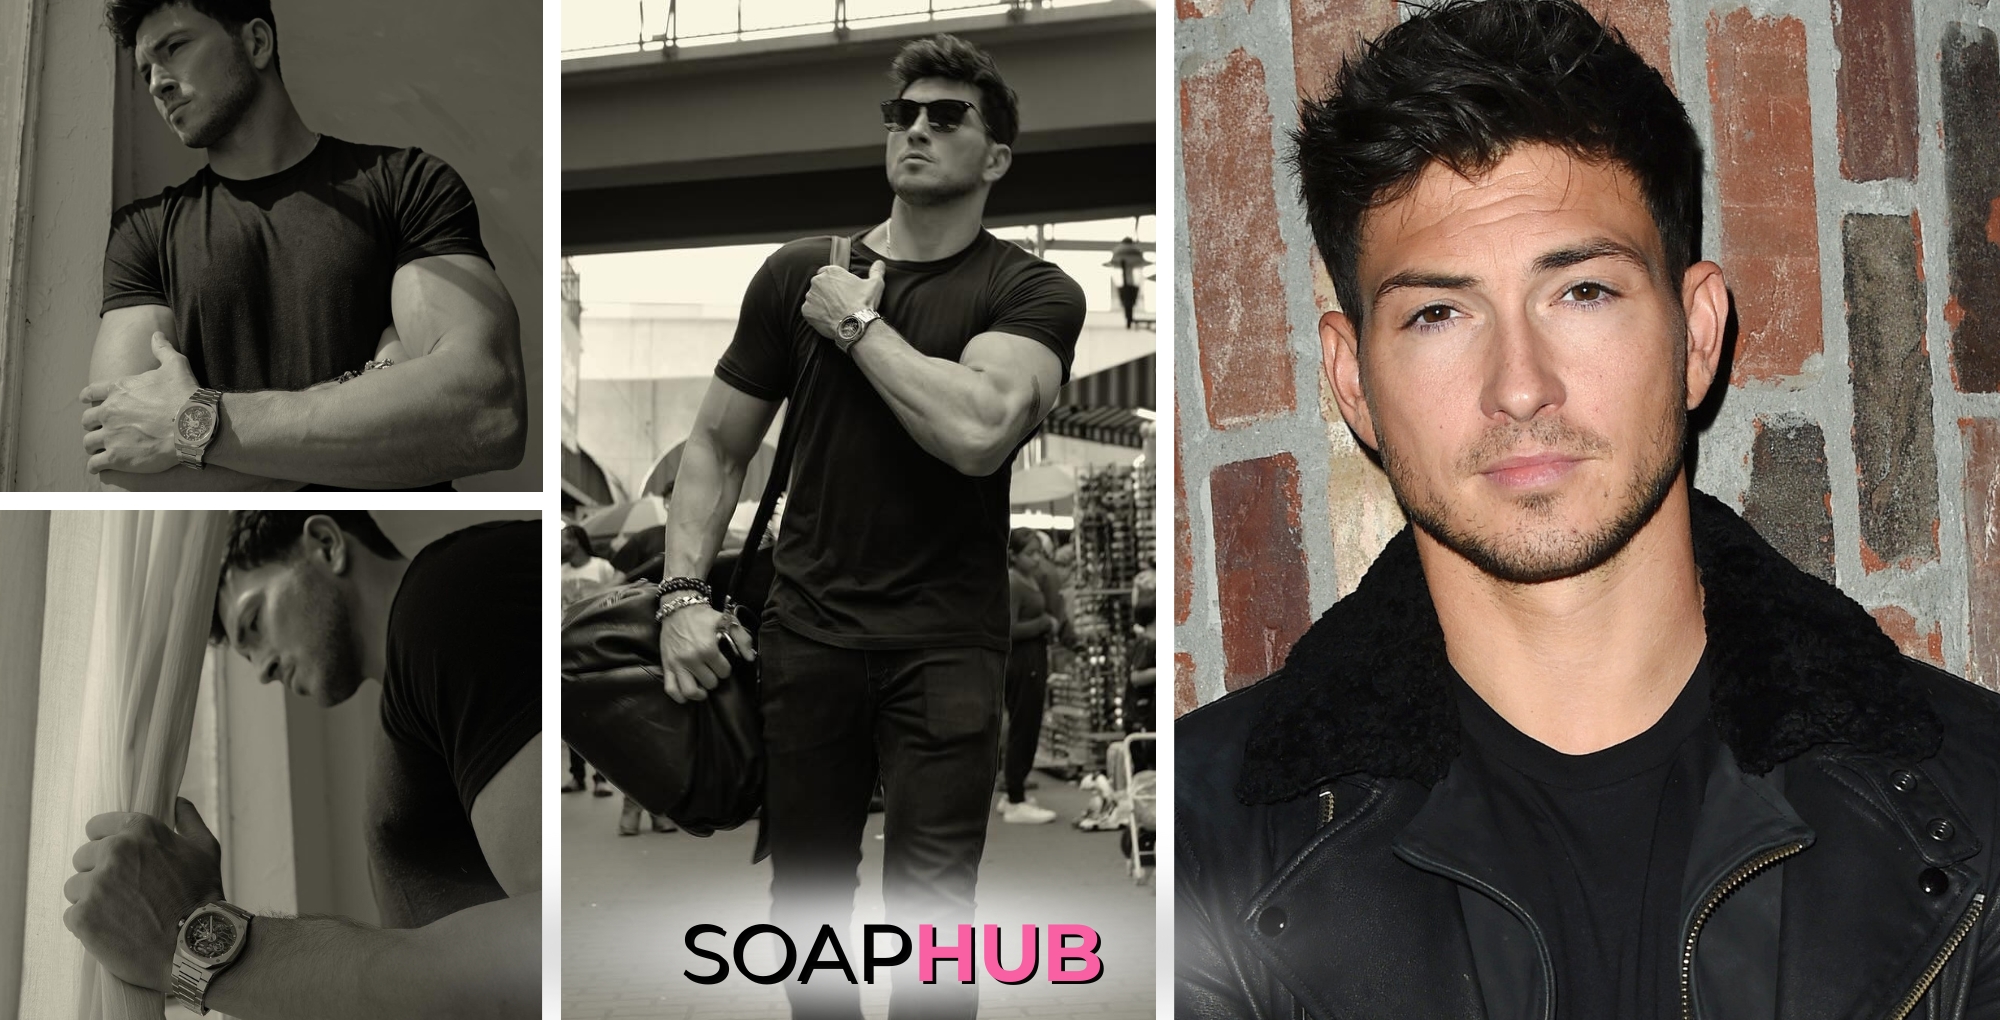 Robert Scott Wilson Aura venture Days of our Lives with the Soap Hub logo at the bottom